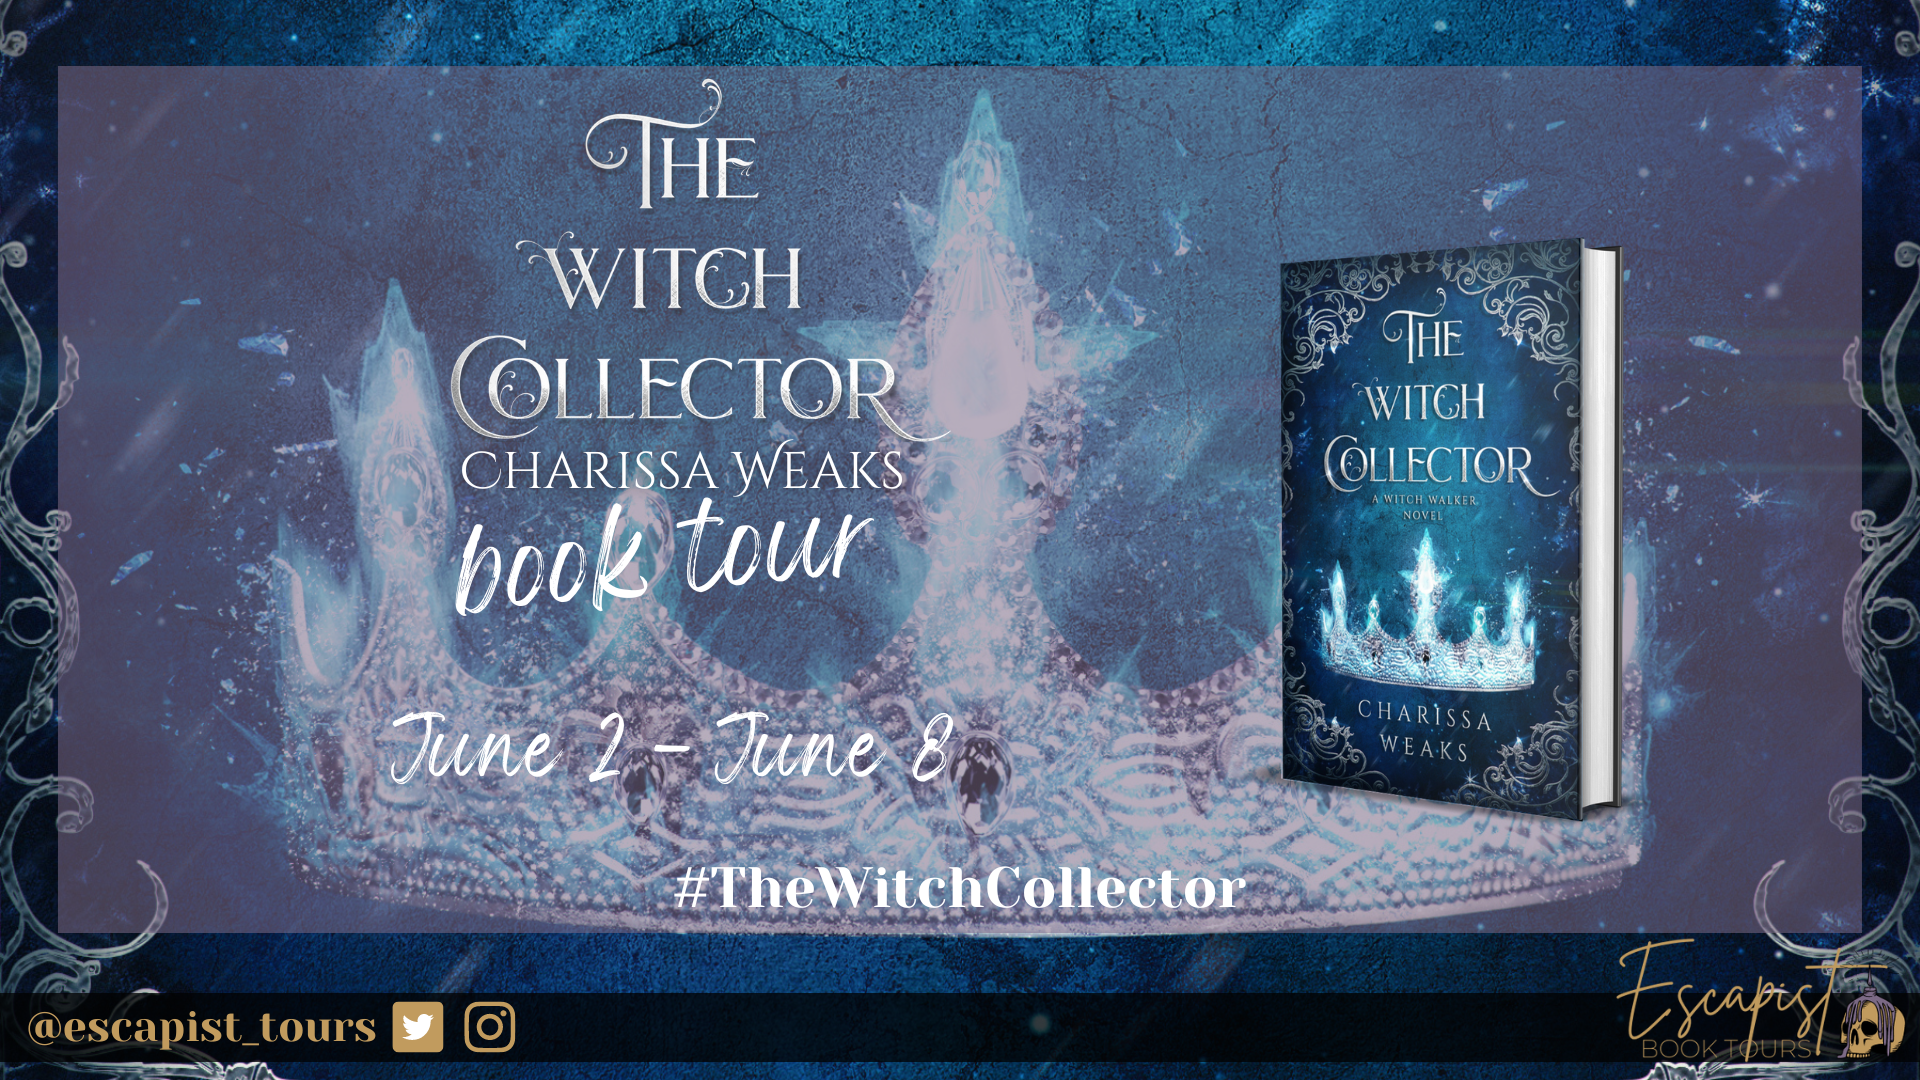 The Witch Collector blog announcement